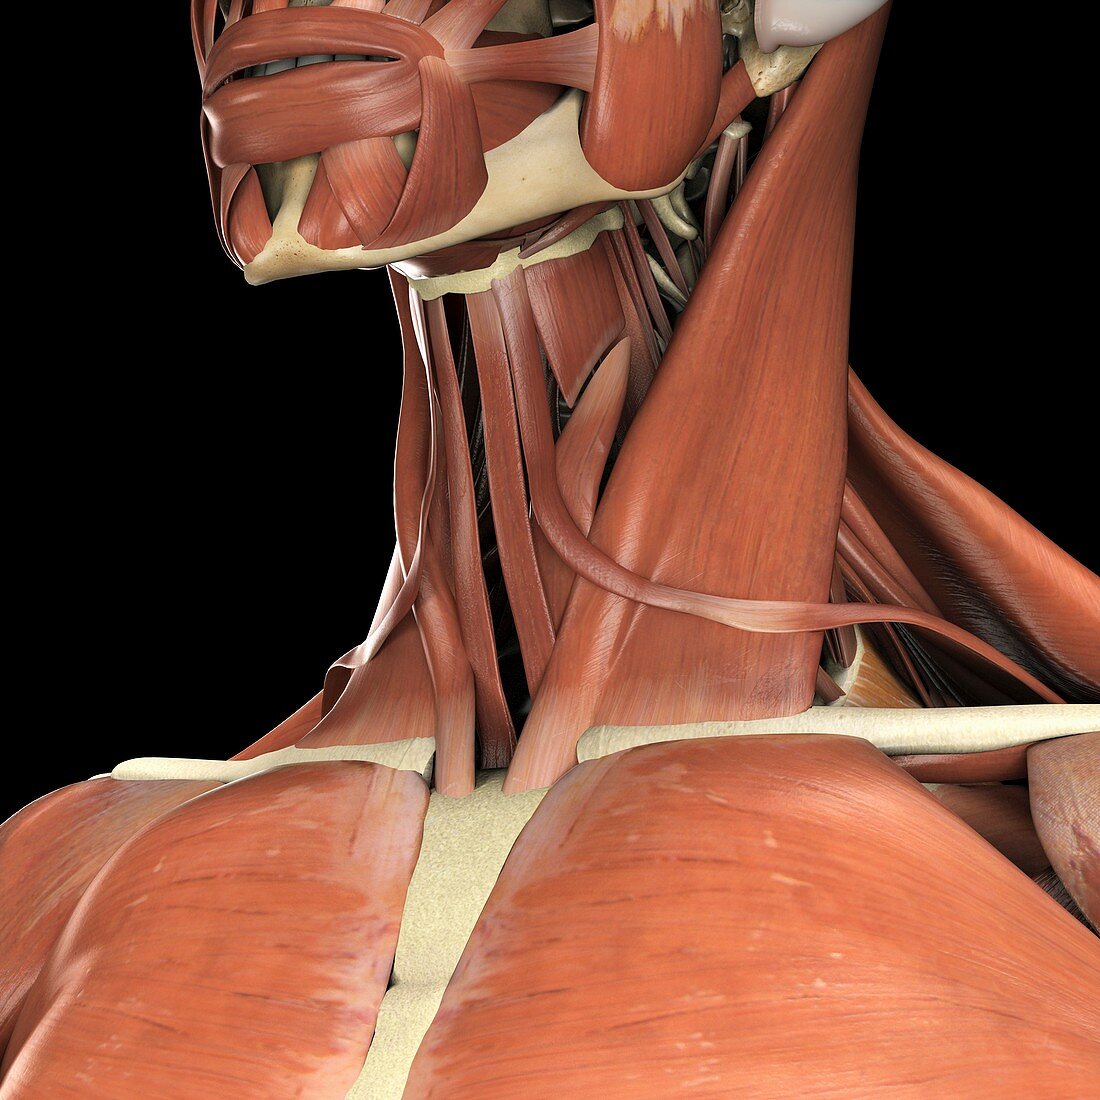 Muscles of the Upper Chest and Neck